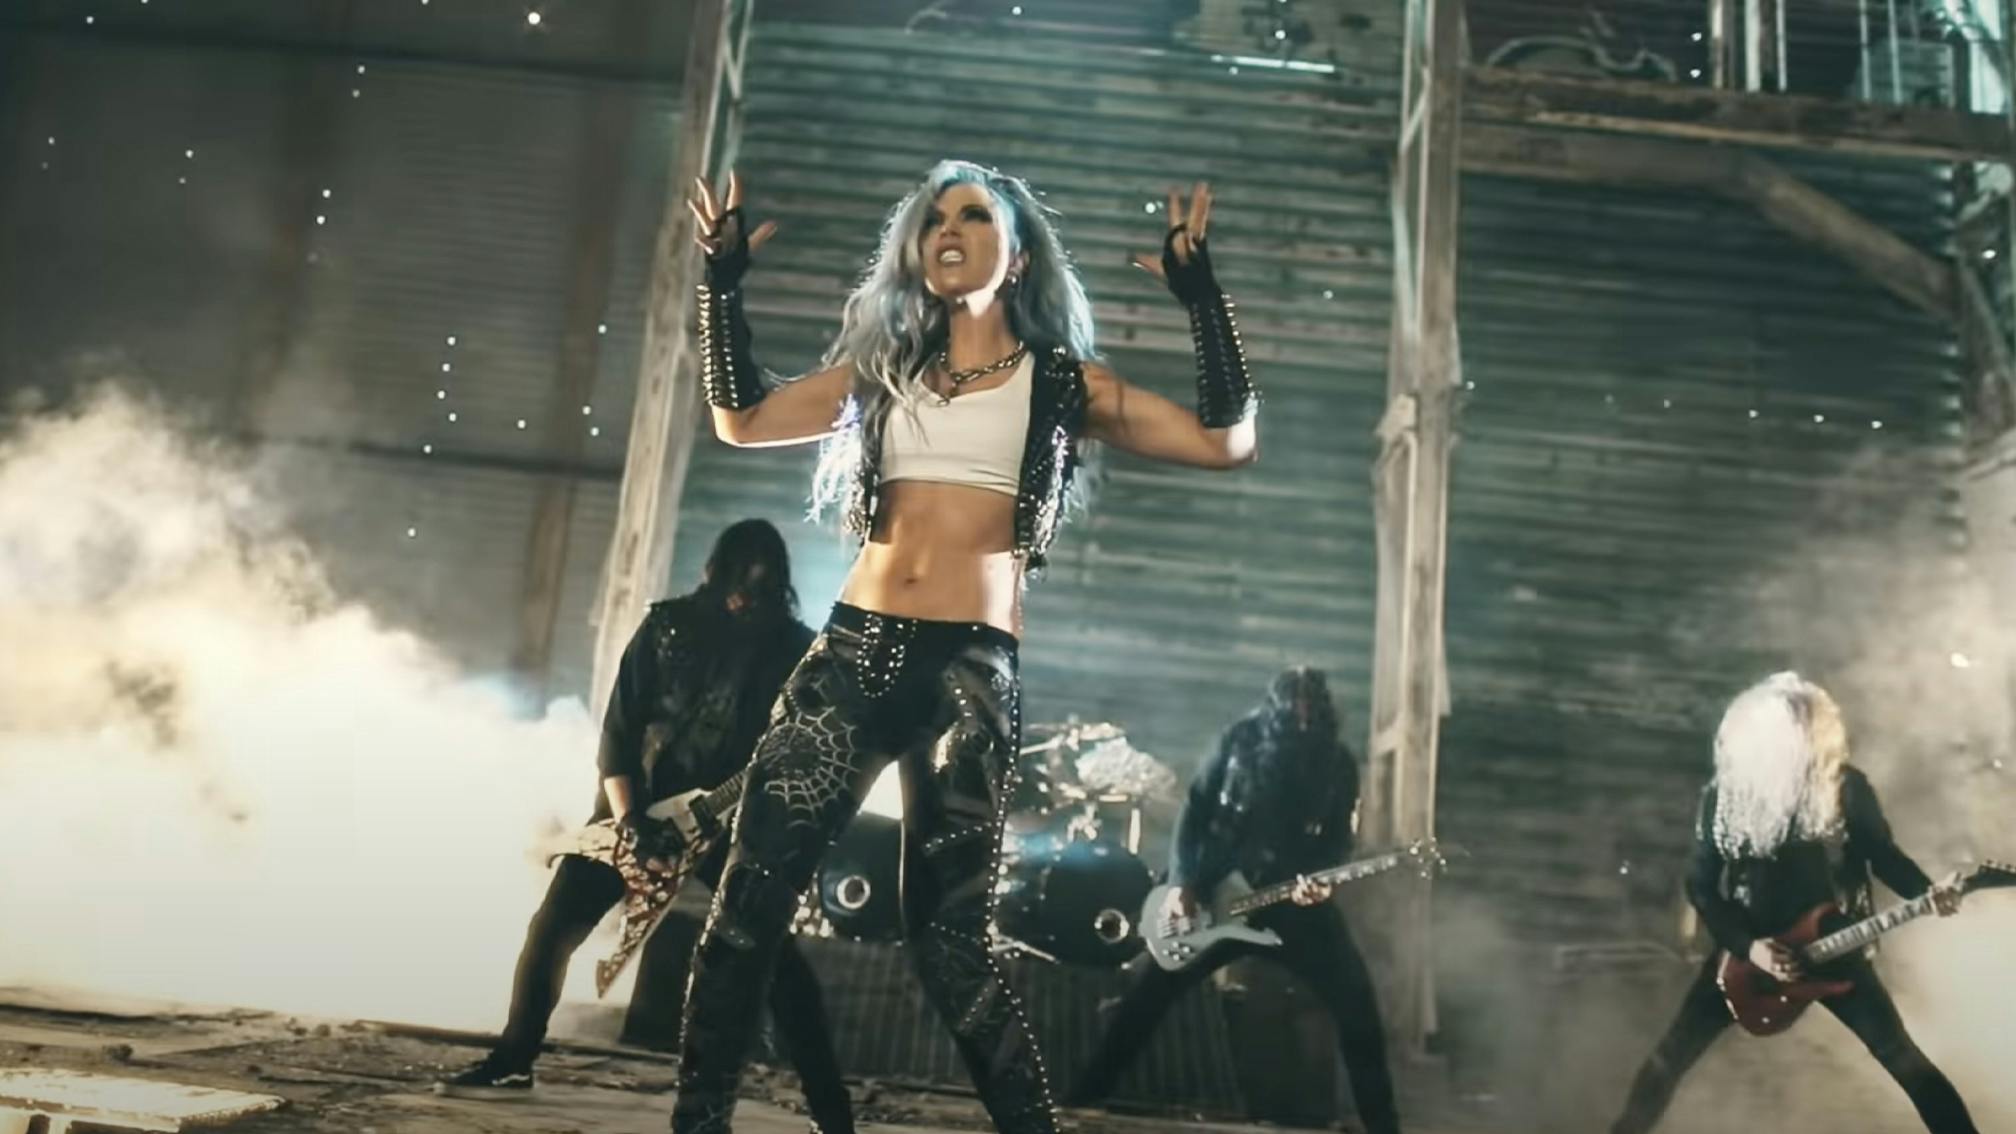 Arch Enemy return with first new single in four years, Deceiver, Deceiver